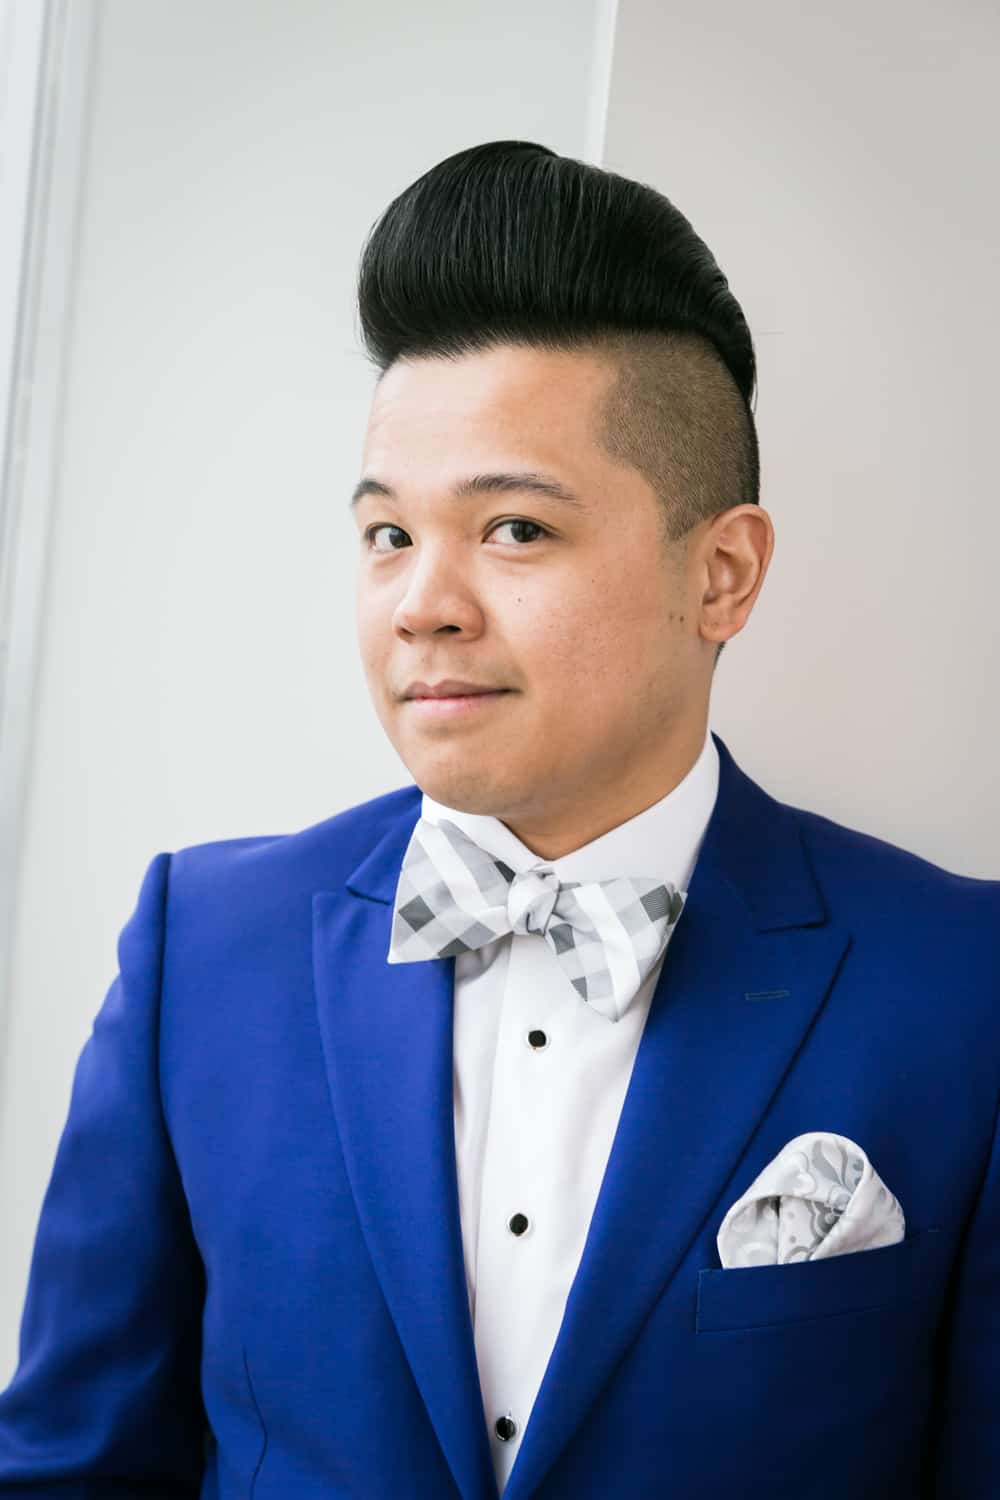 Portrait of groom in blue suit and bow tie